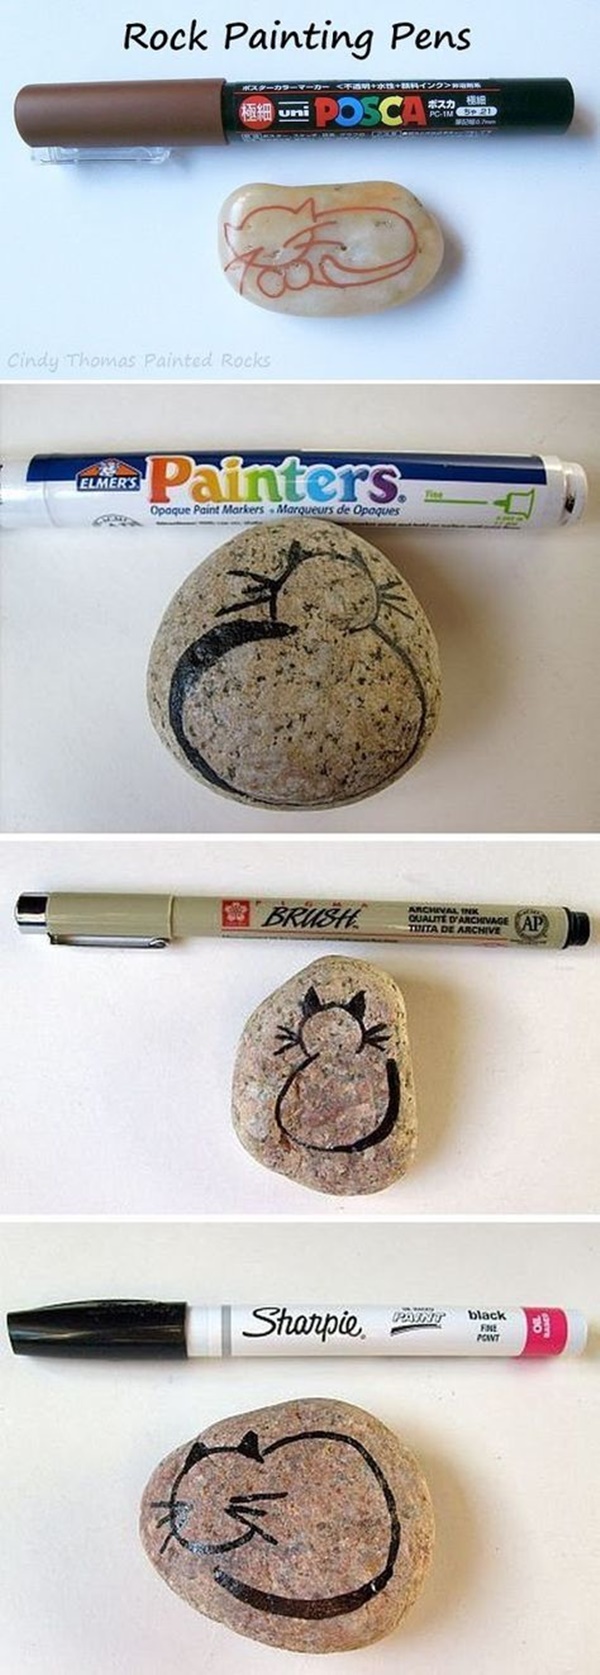 Painting Realistic Animals on Rock